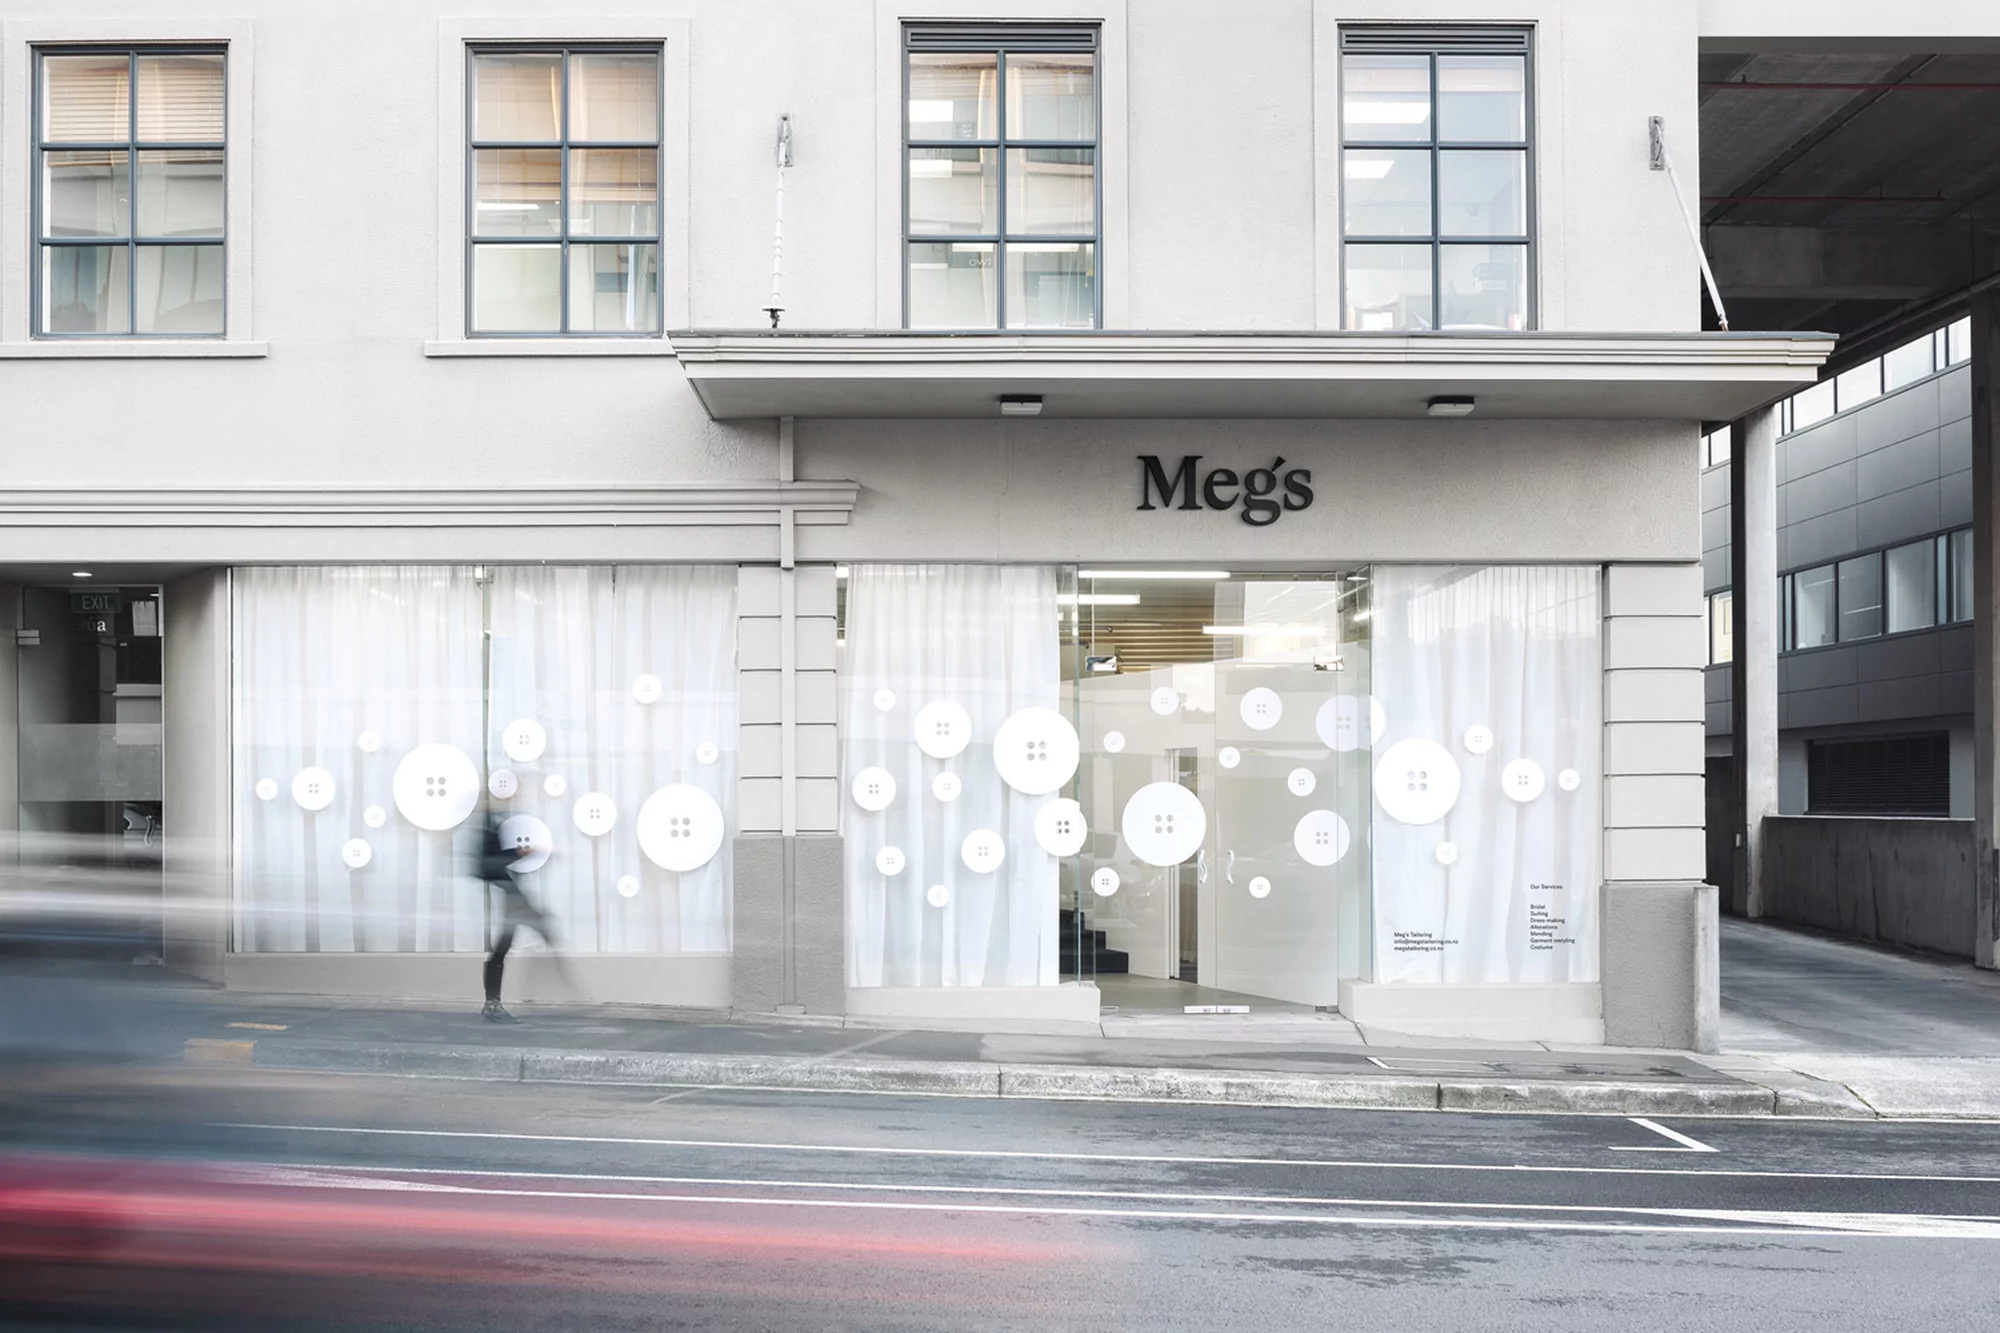 Meg's Tailoring by Studio South